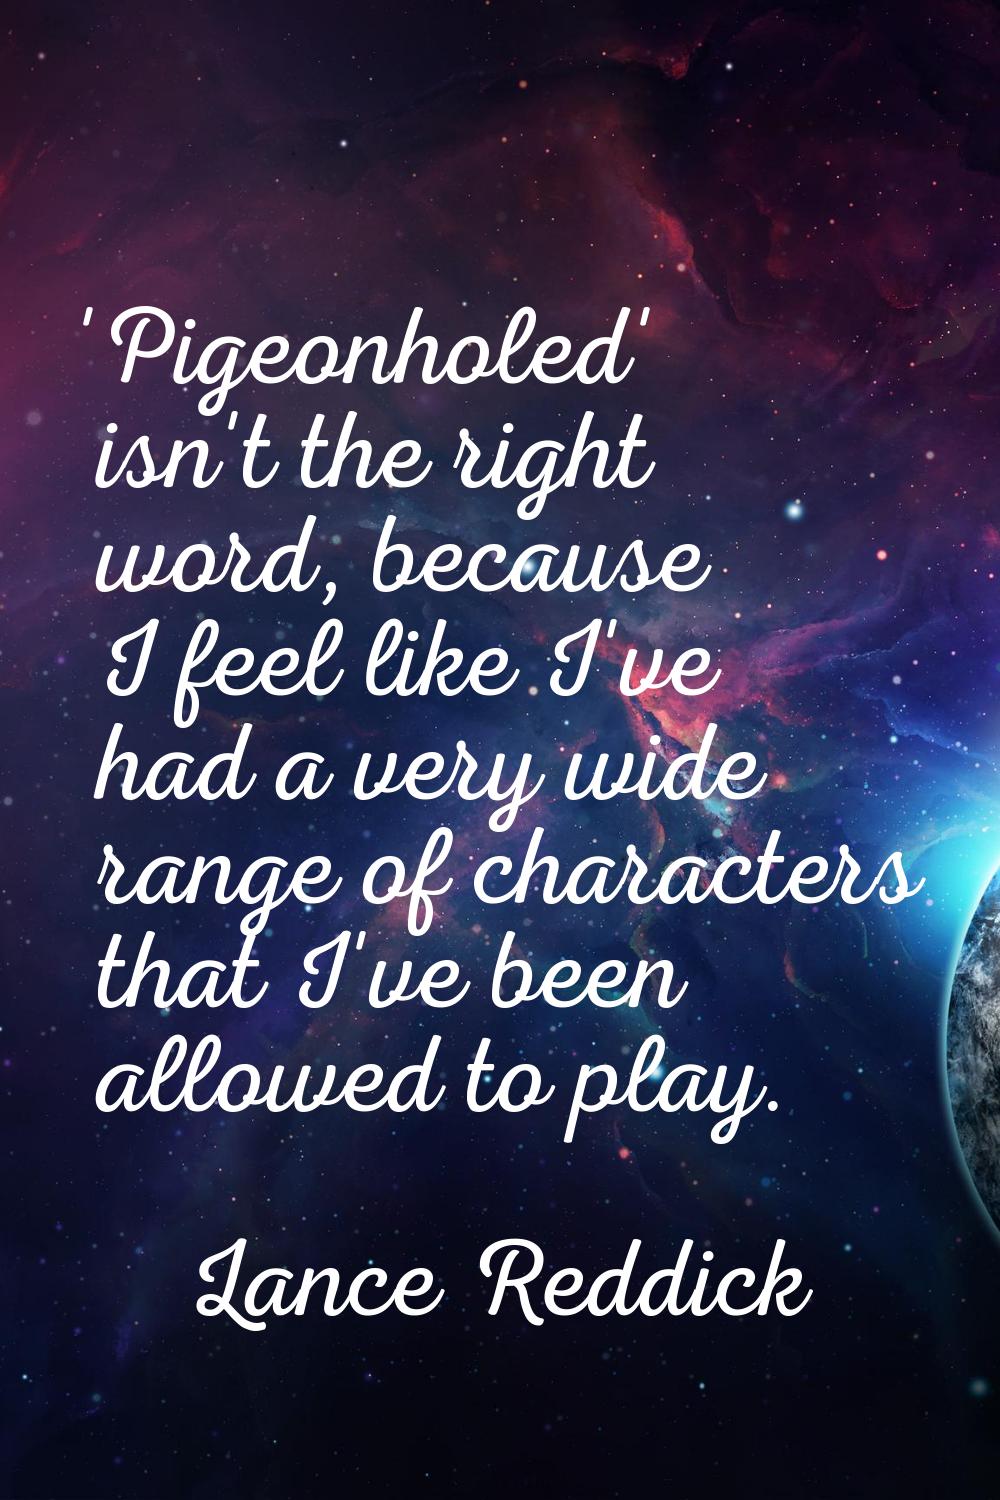 'Pigeonholed' isn't the right word, because I feel like I've had a very wide range of characters th